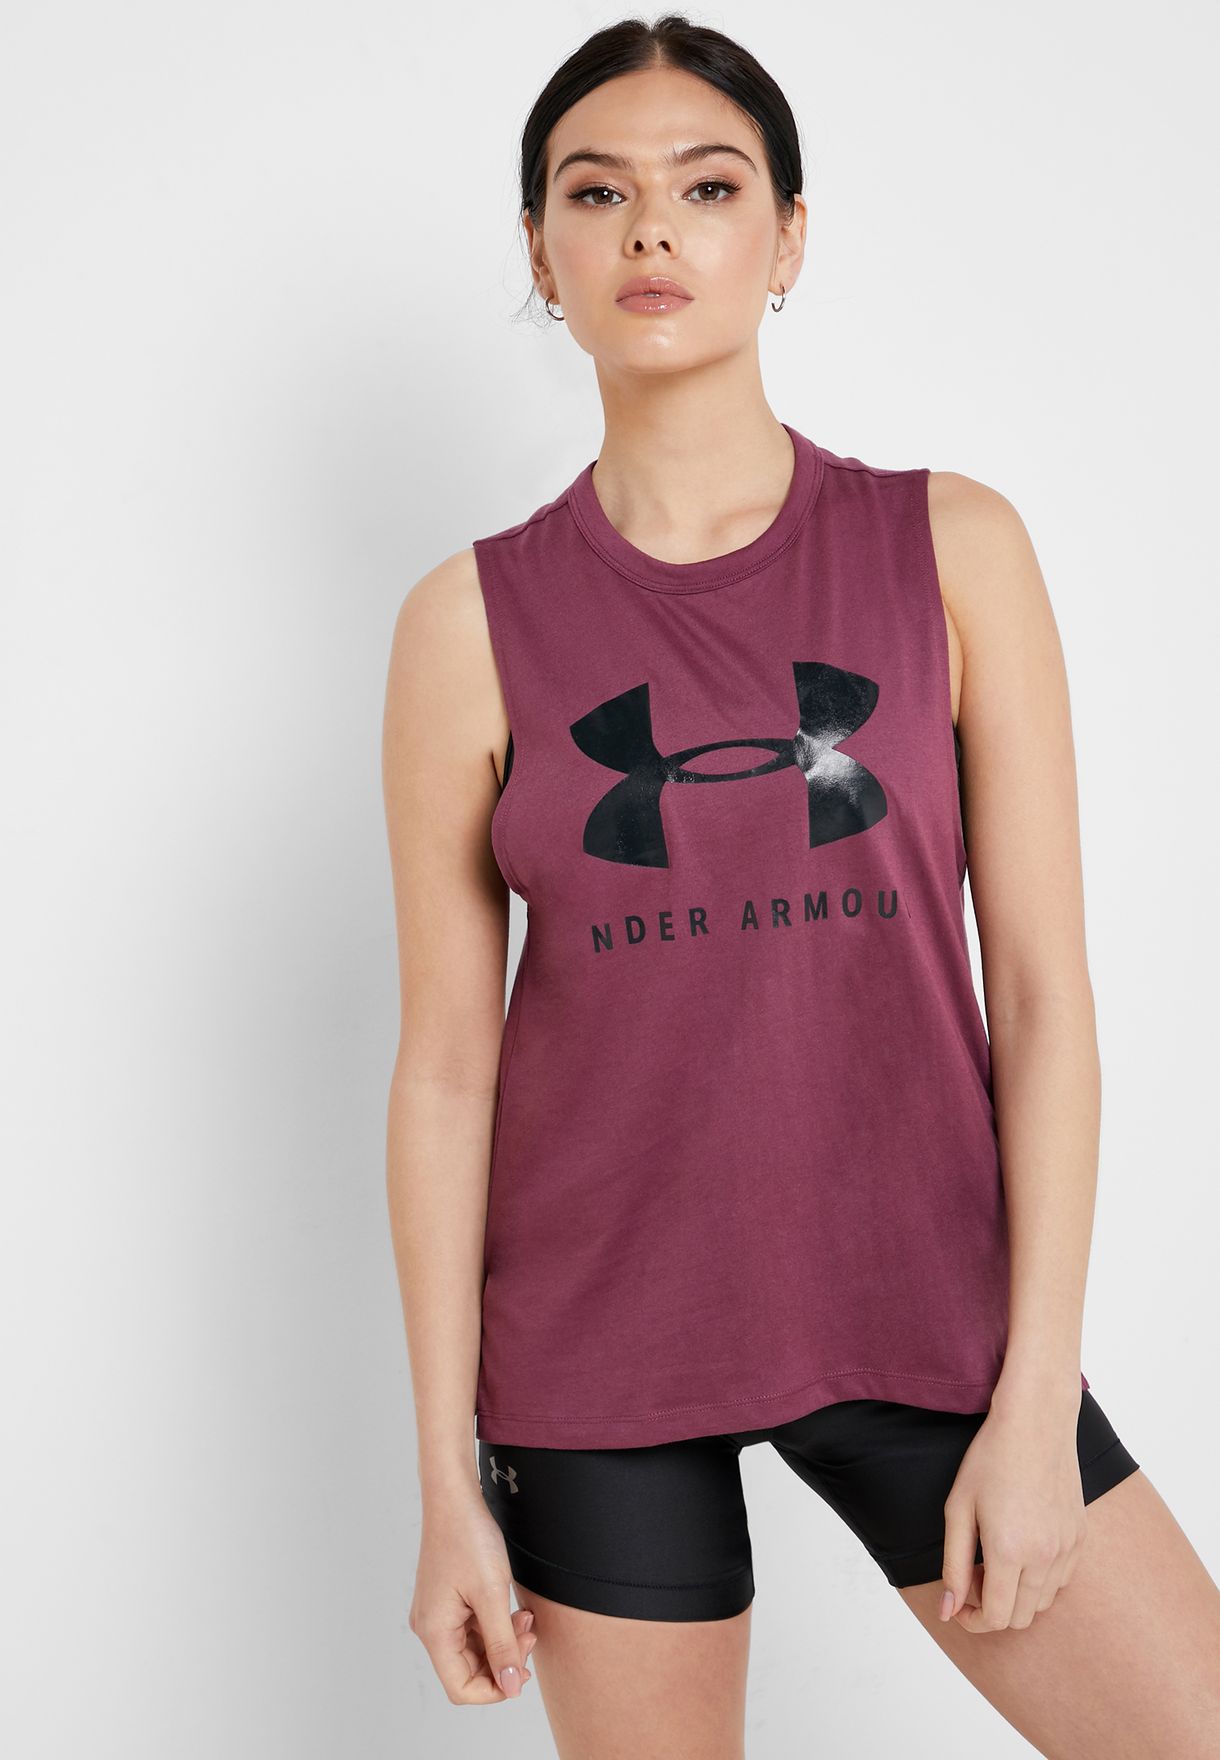 Under Armour Womens Graphic Sport Style Muscle Tank